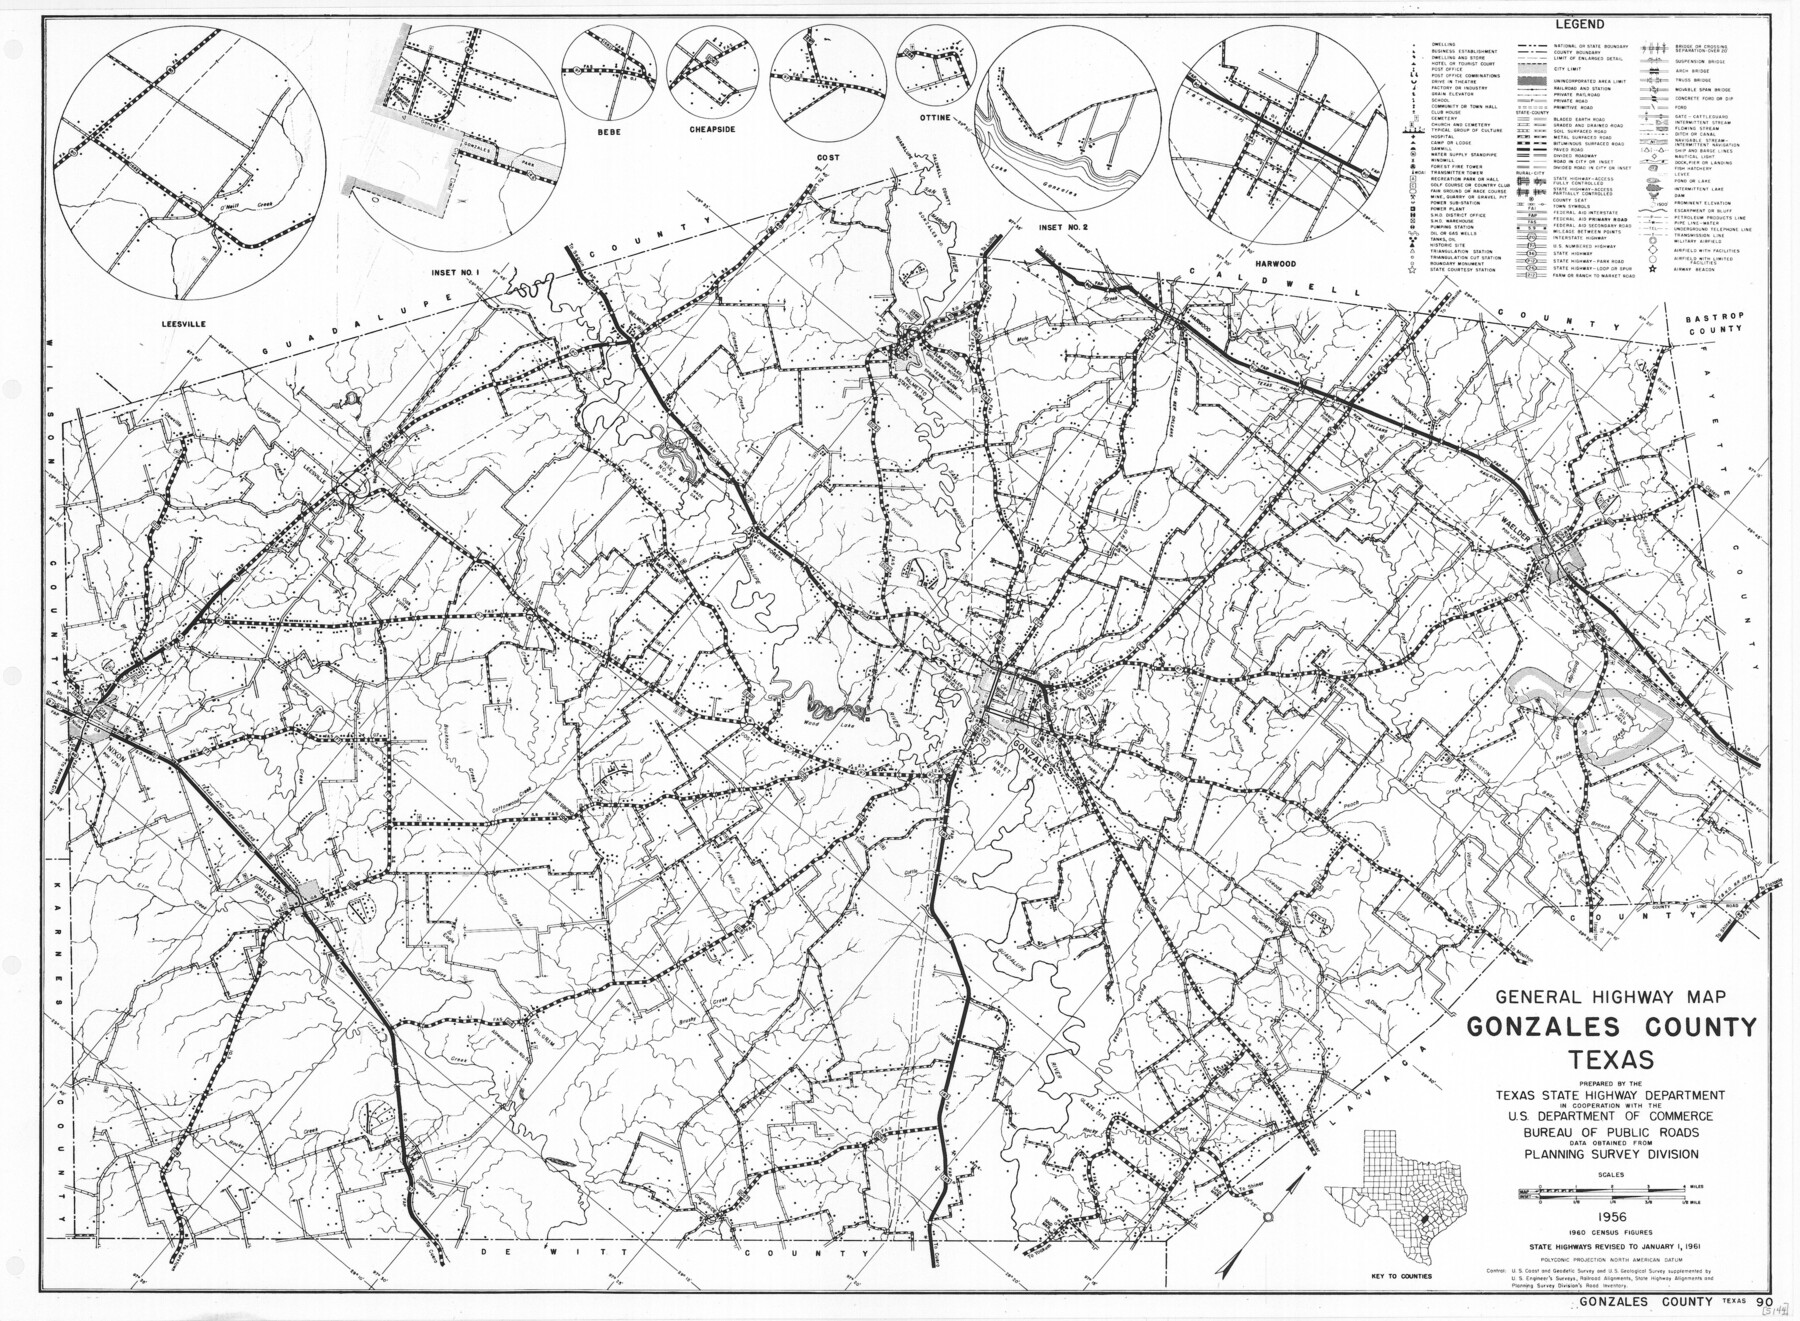 79482, General Highway Map, Gonzales County, Texas, Texas State Library and Archives